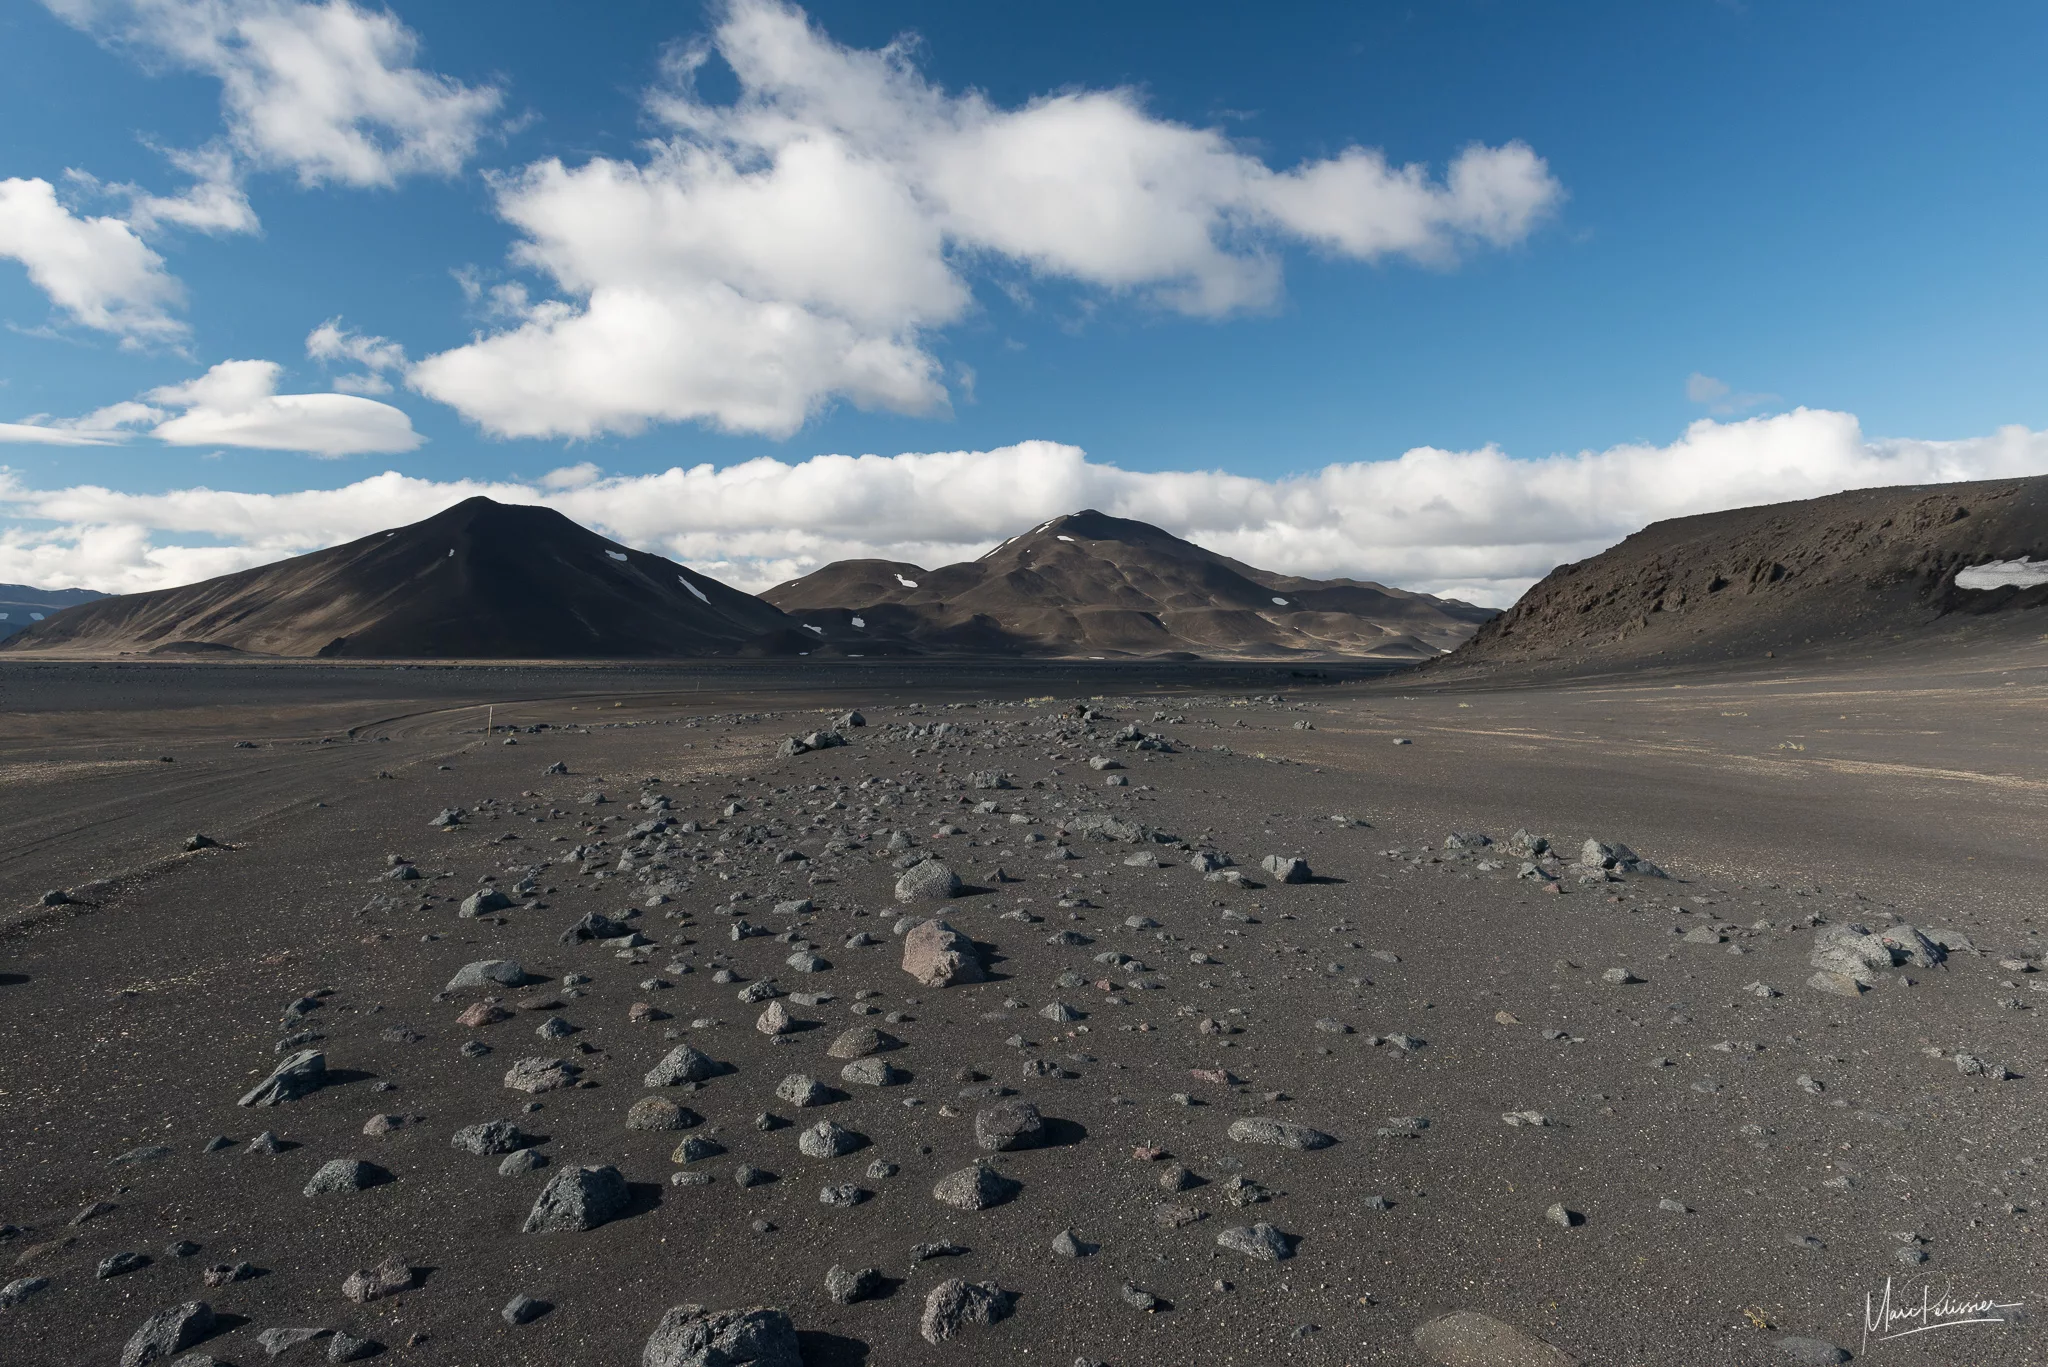 Are we on Mars or Iceland ?, Iceland